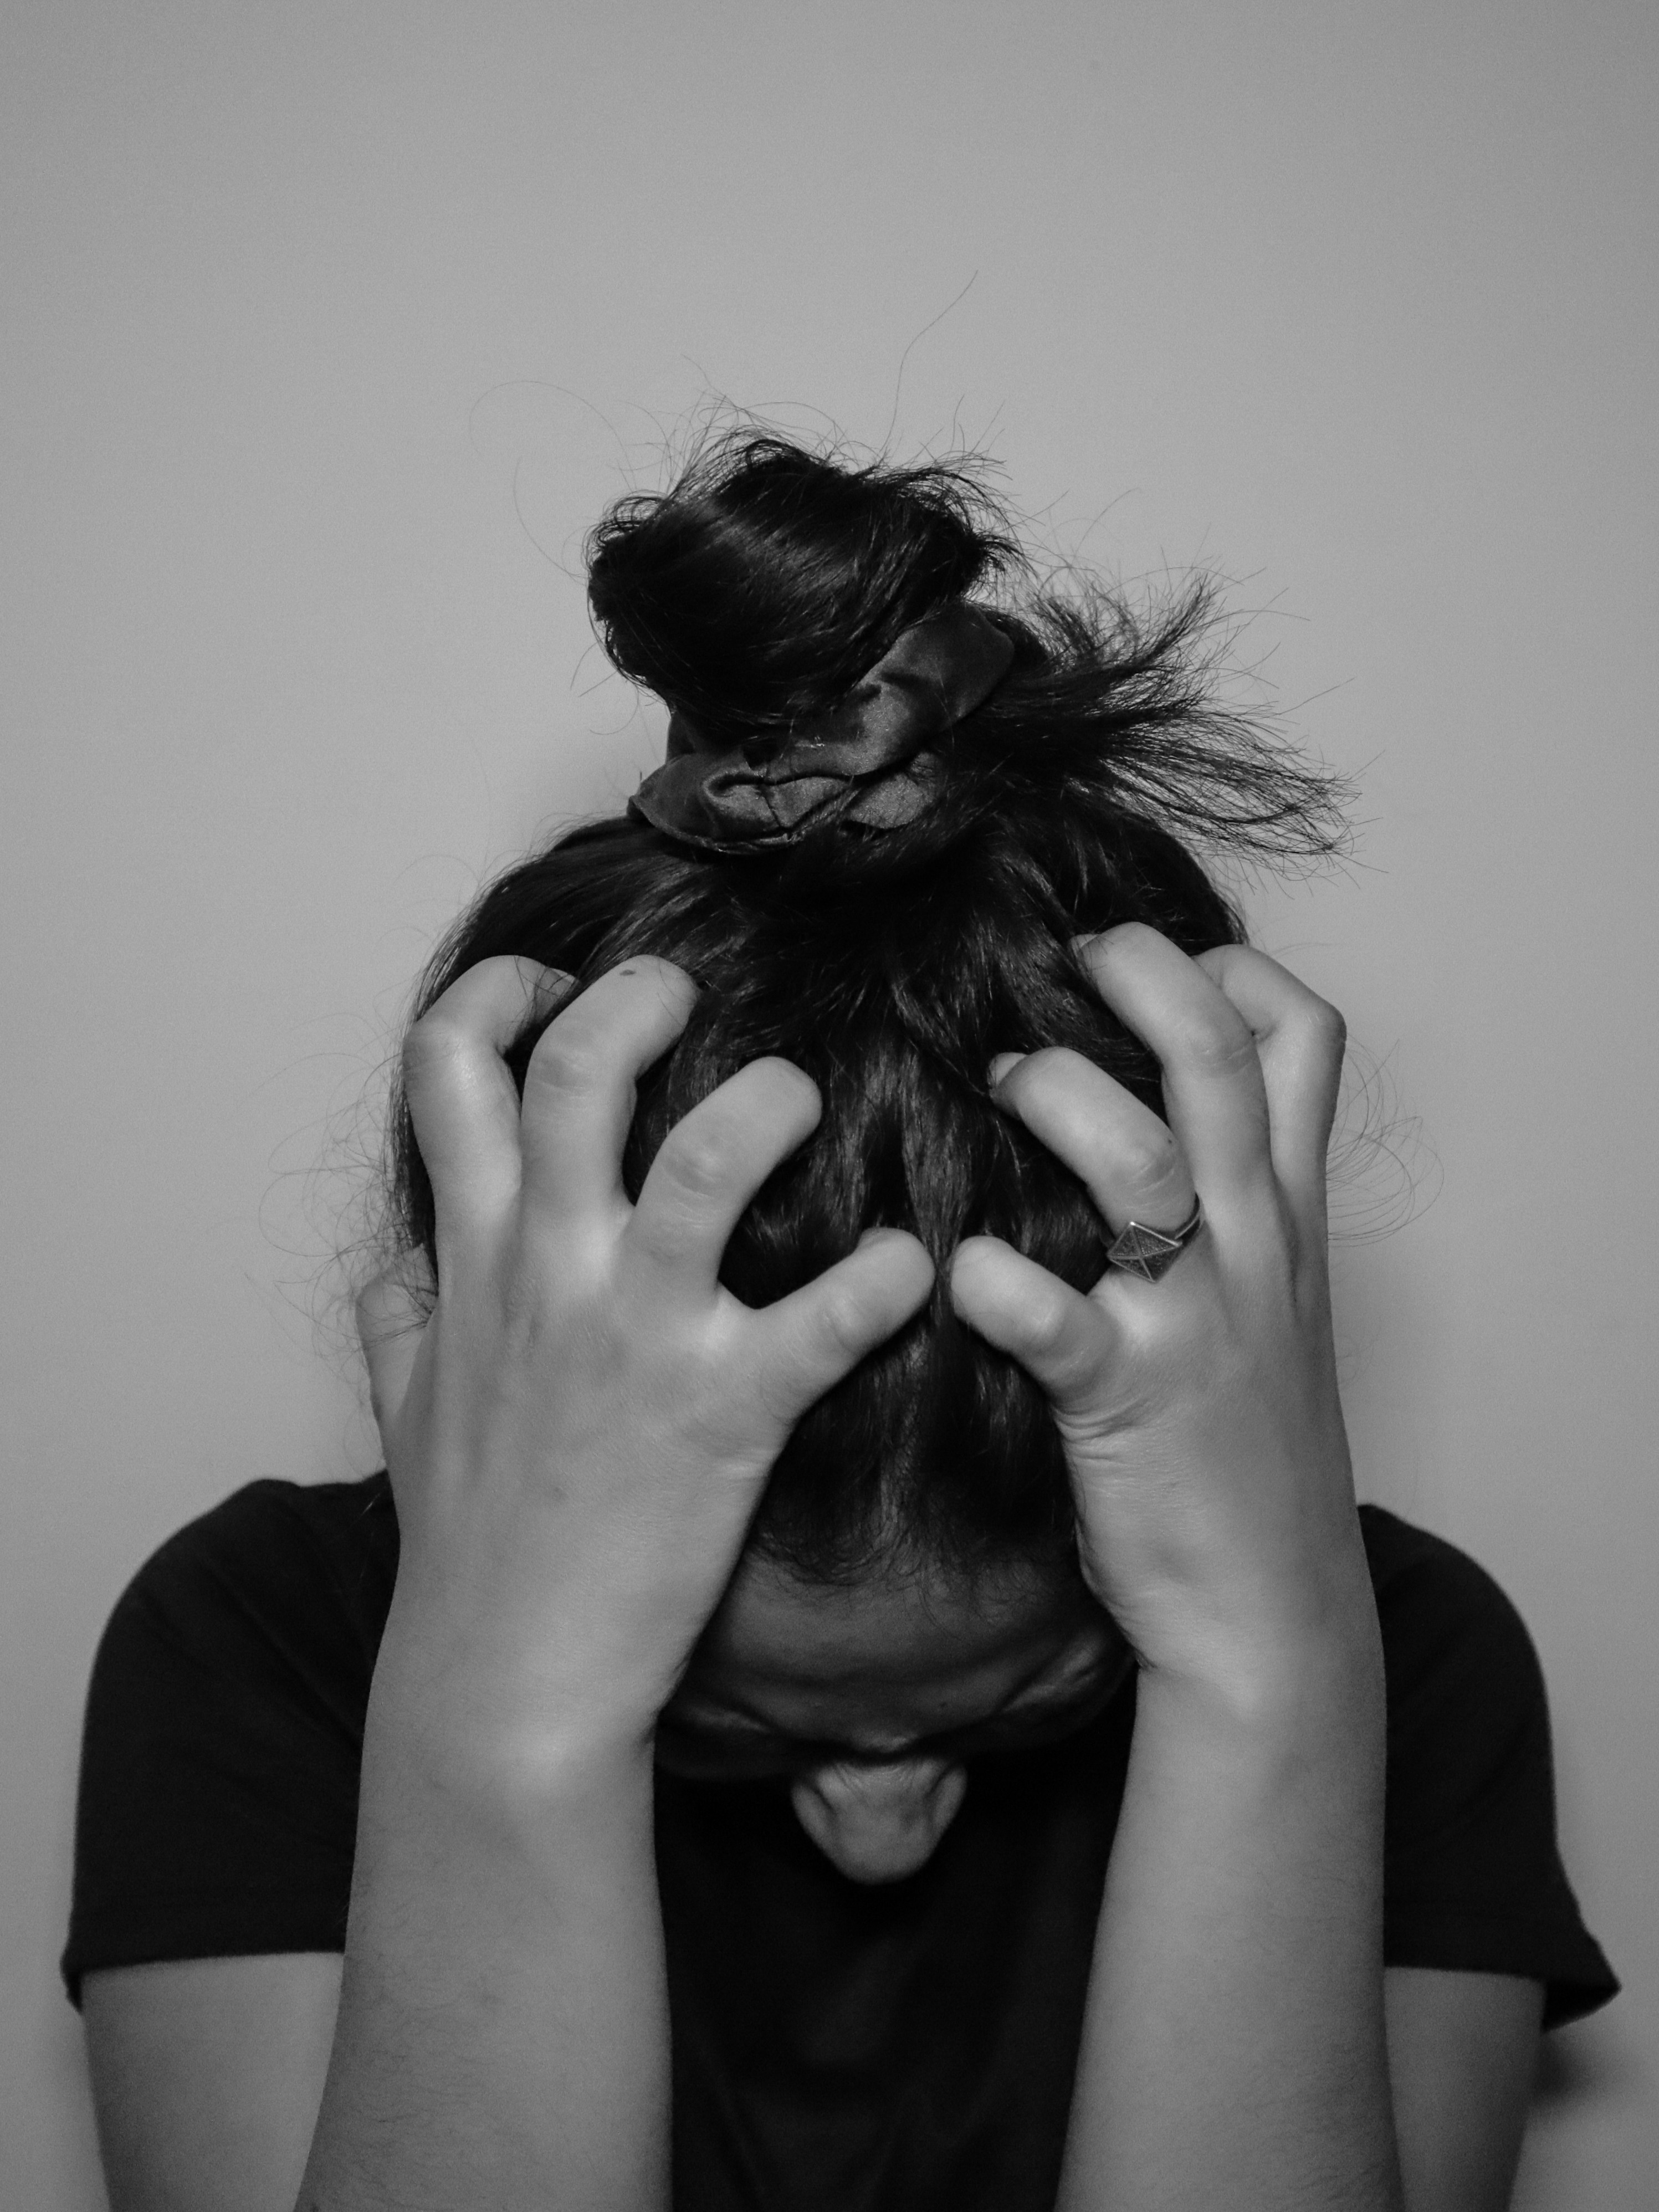 A frustrated woman | Source: Unsplash